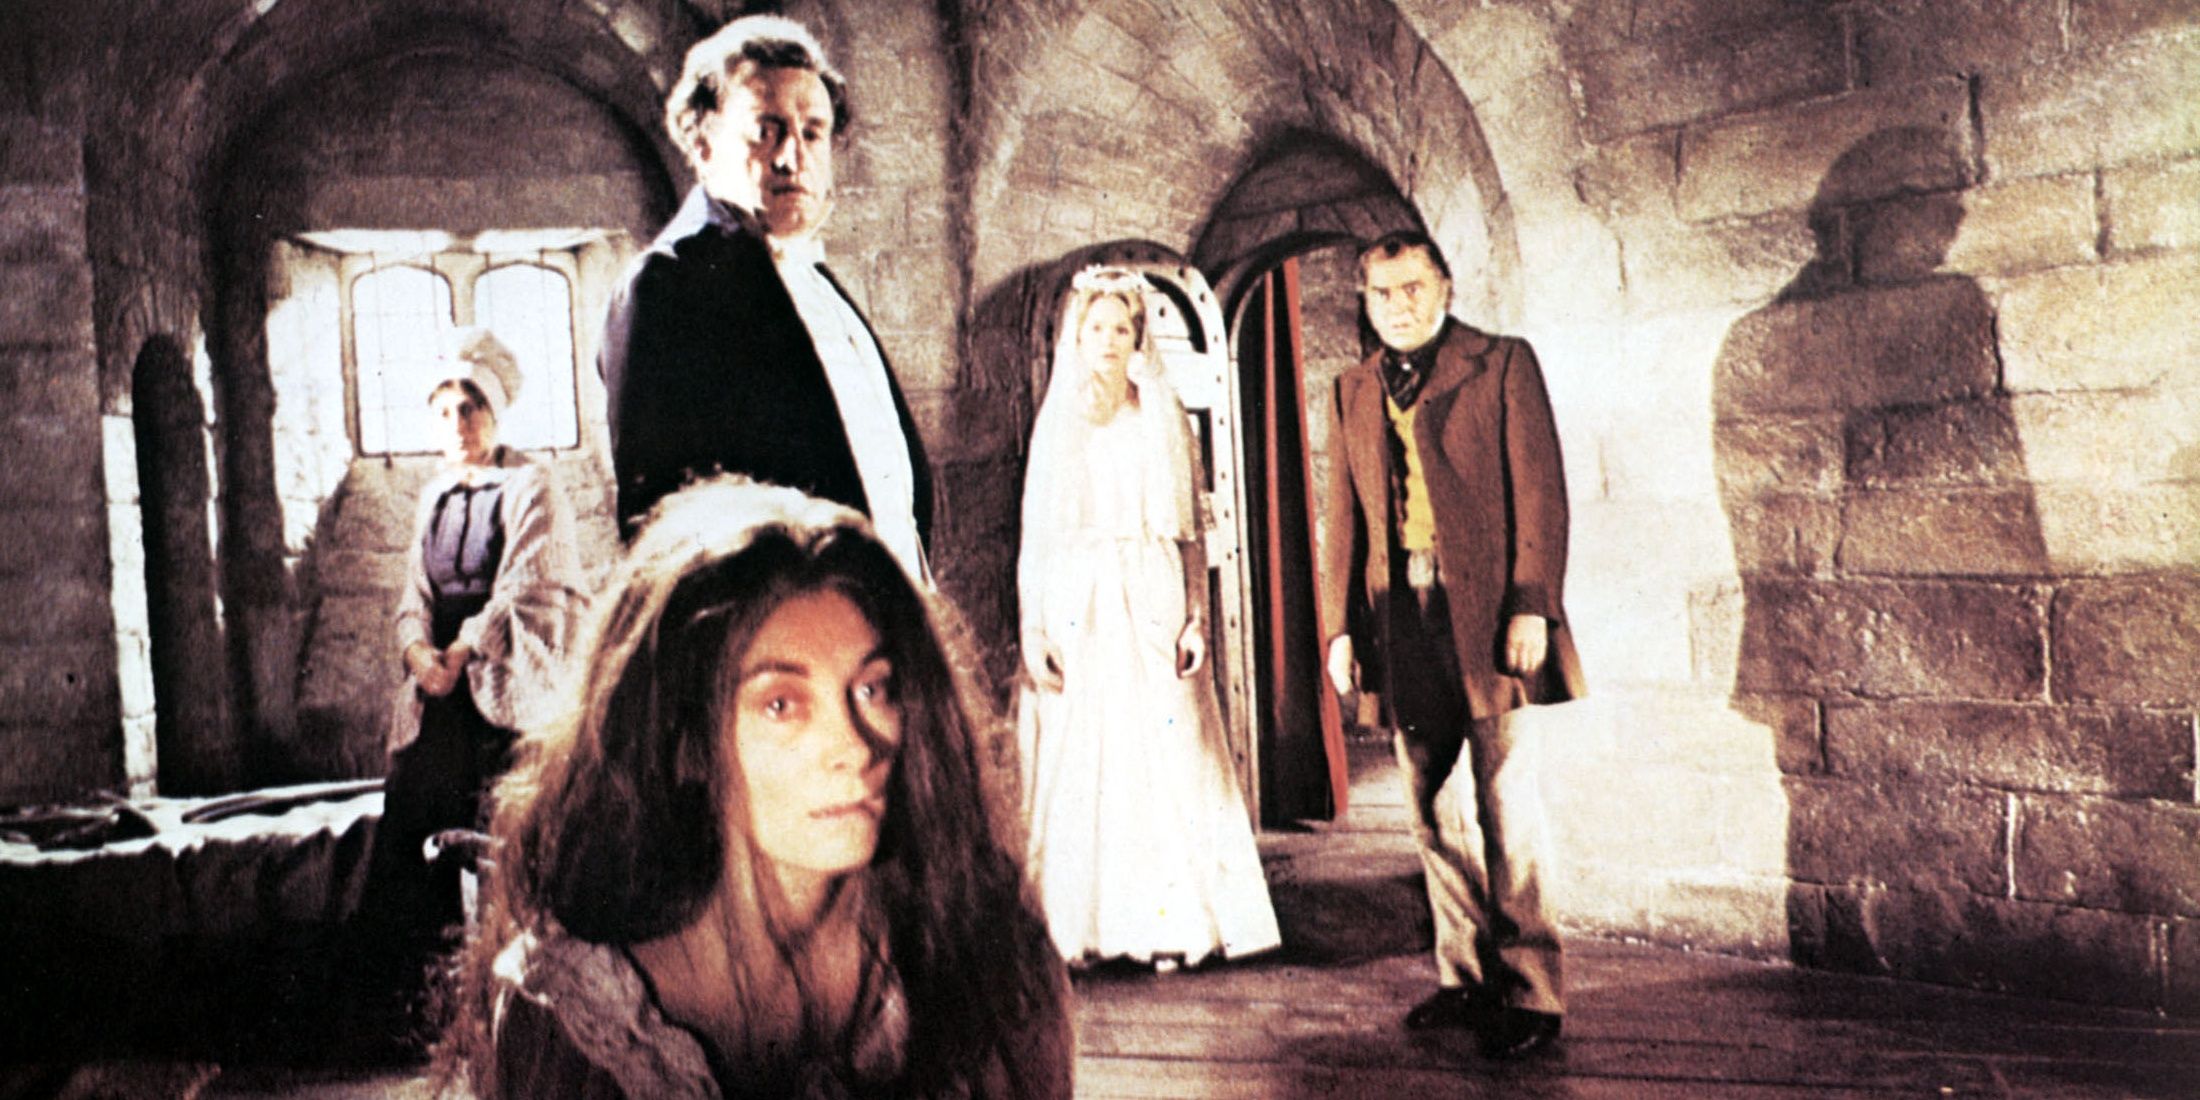 Two men and three women in a stone room in the 1970 version of Jane Eyre